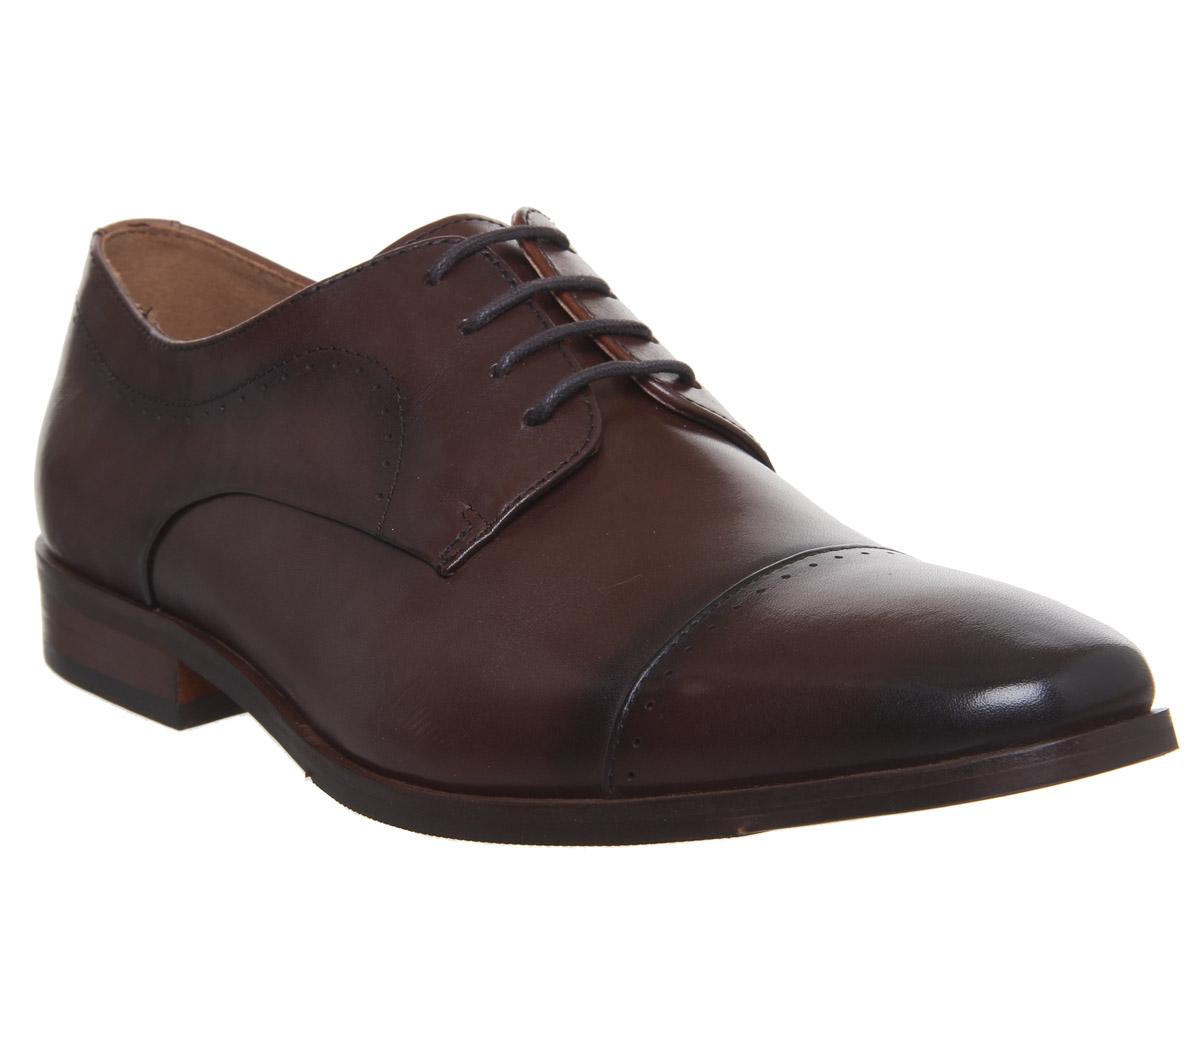 OFFICELook Toe Cap ShoesBrown Leather